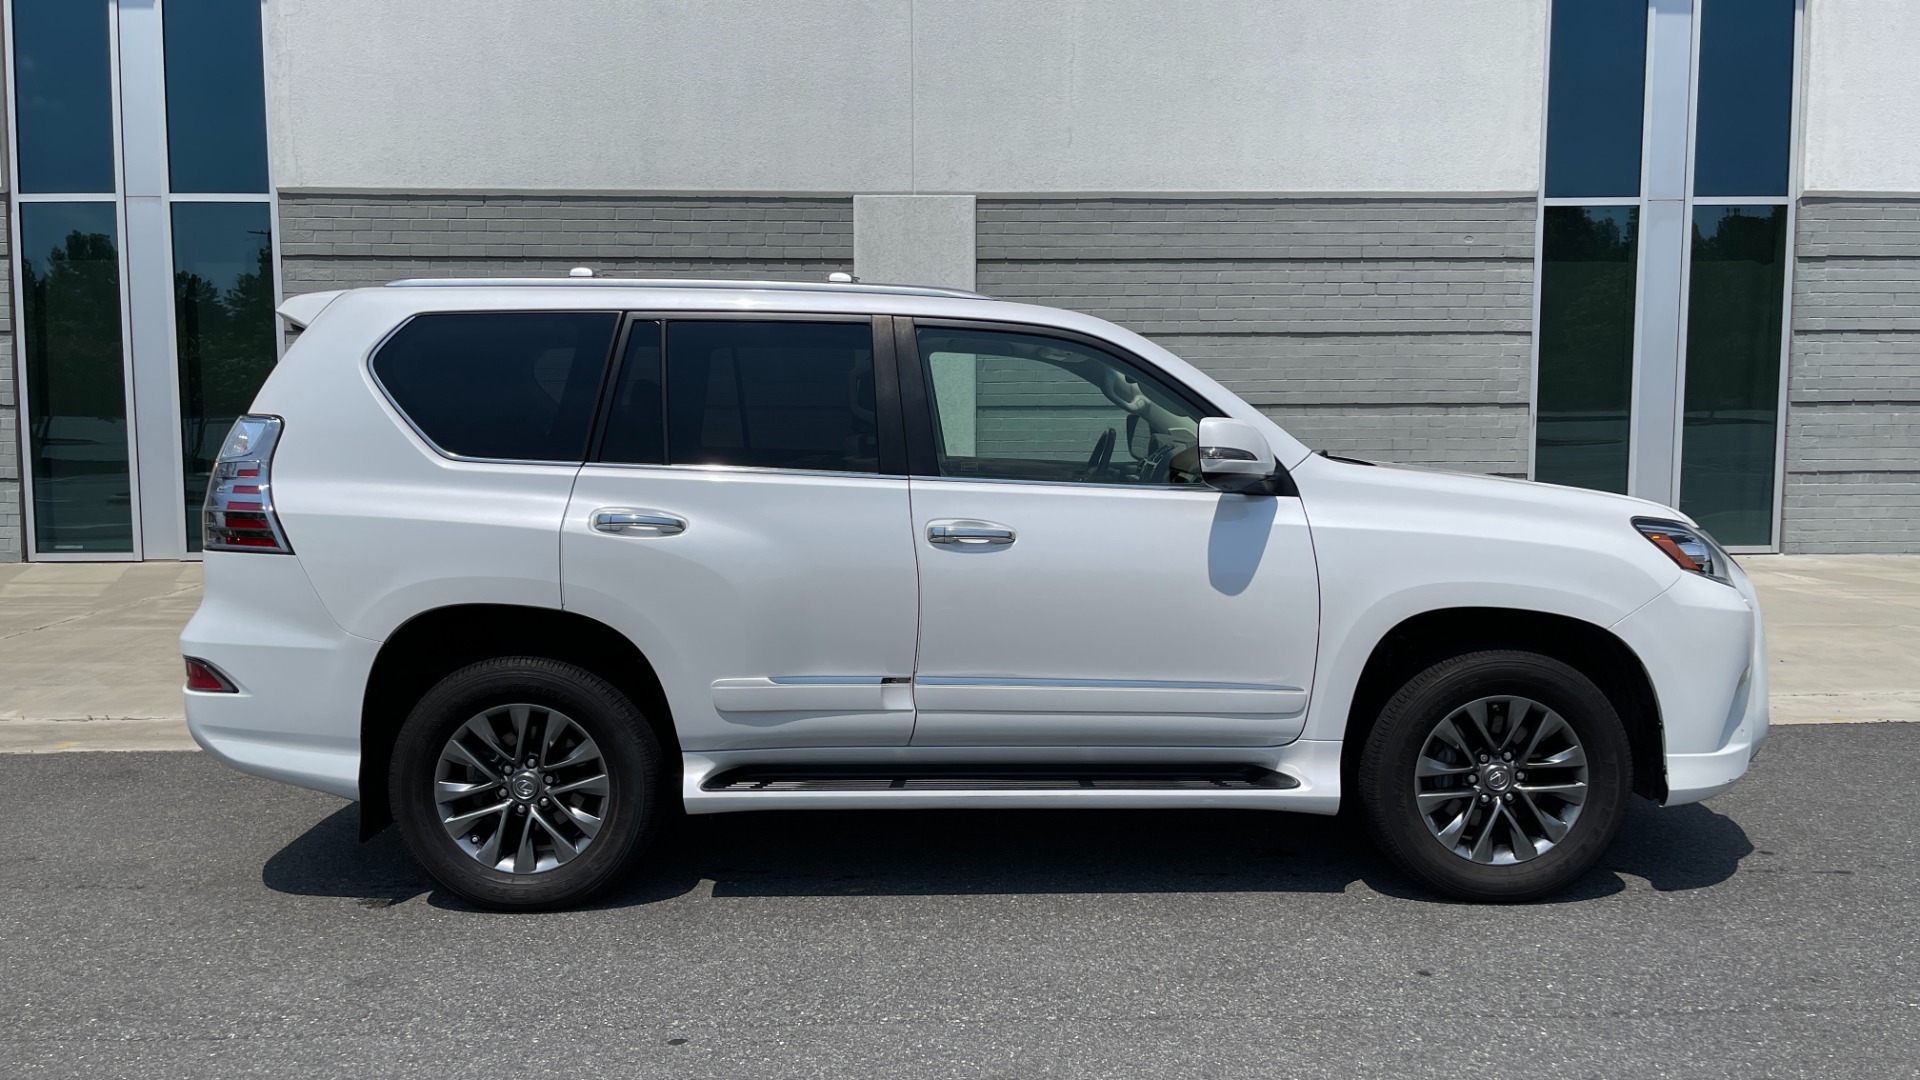 Used 2015 Lexus GX 460 LUXURY / 4.6L V8 / 4WD / NAV / SUNROOF / 3-ROW / REARVIEW for sale Sold at Formula Imports in Charlotte NC 28227 6